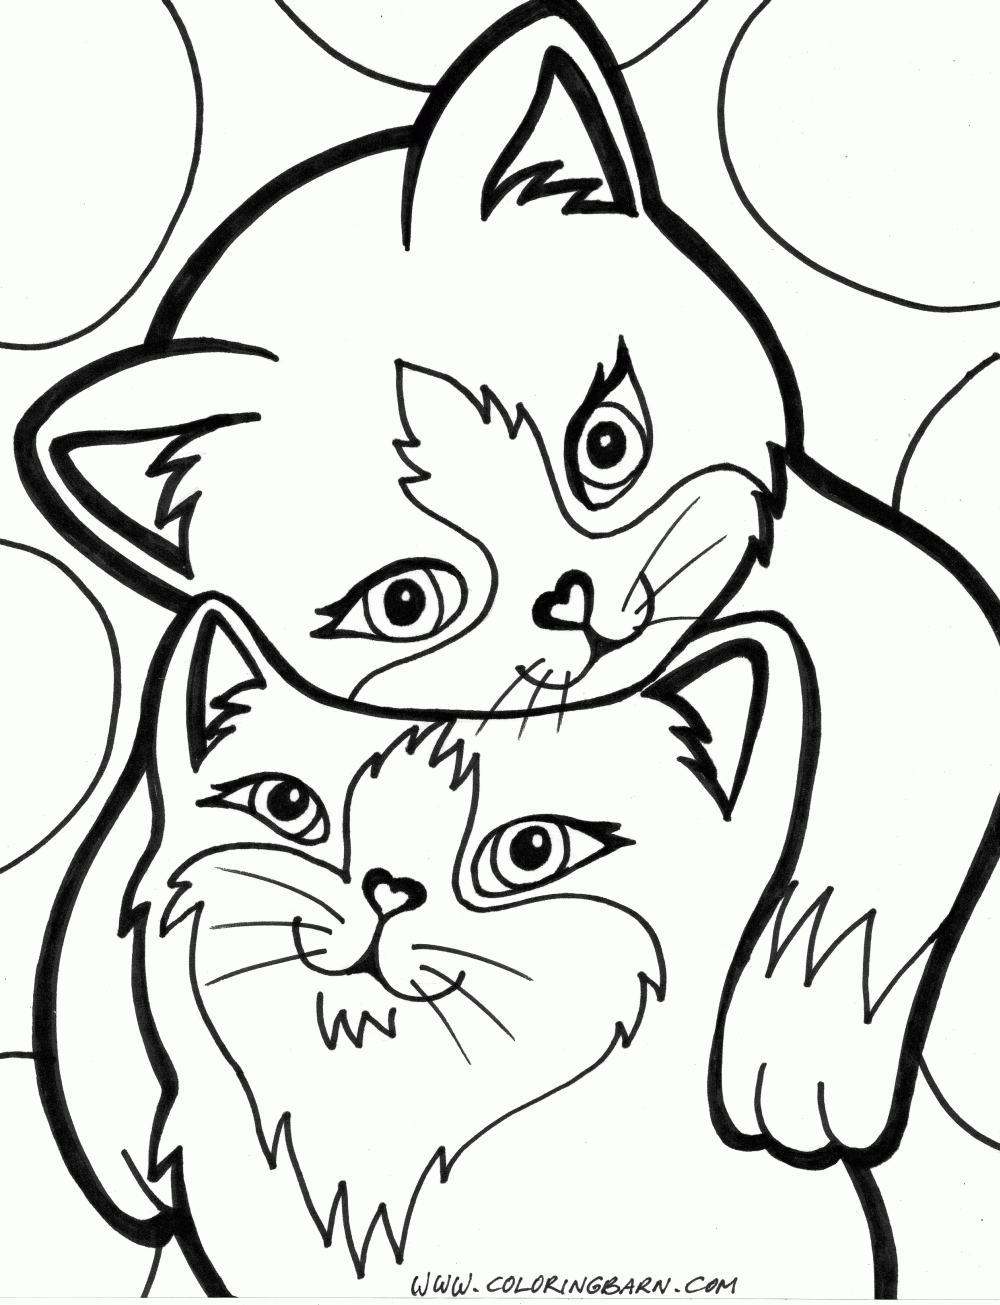 Cat Coloring Pages To Print Out - Coloring Pages For All Ages